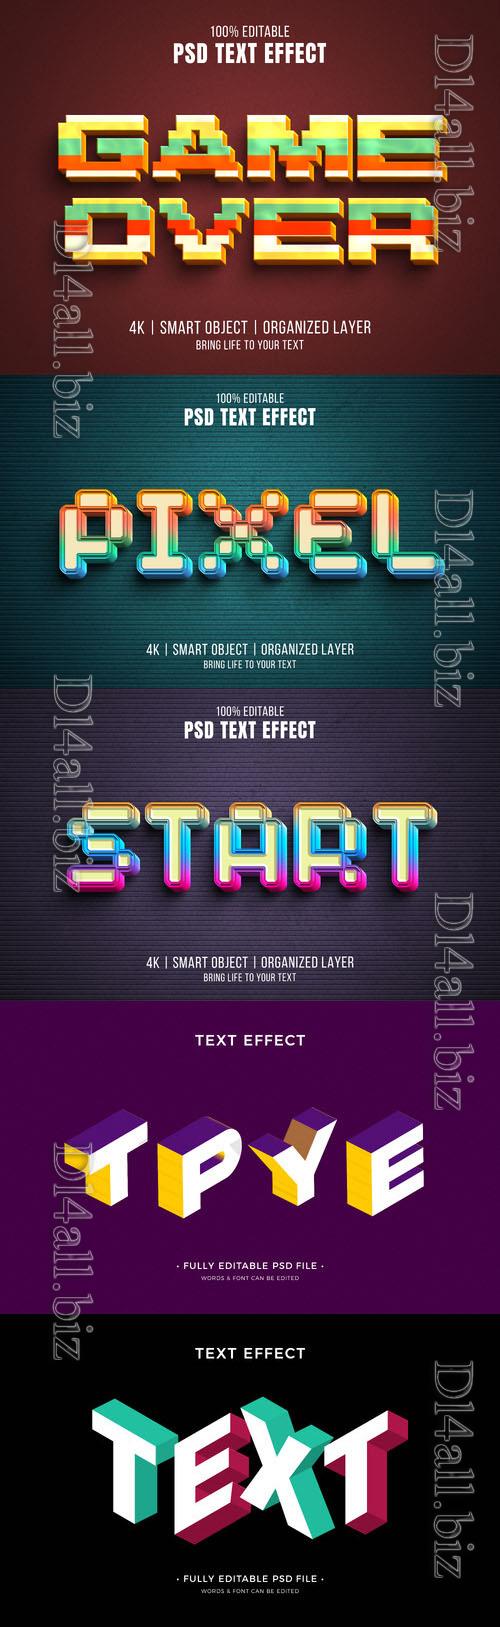 Psd style text effect editable design  collection vol 264